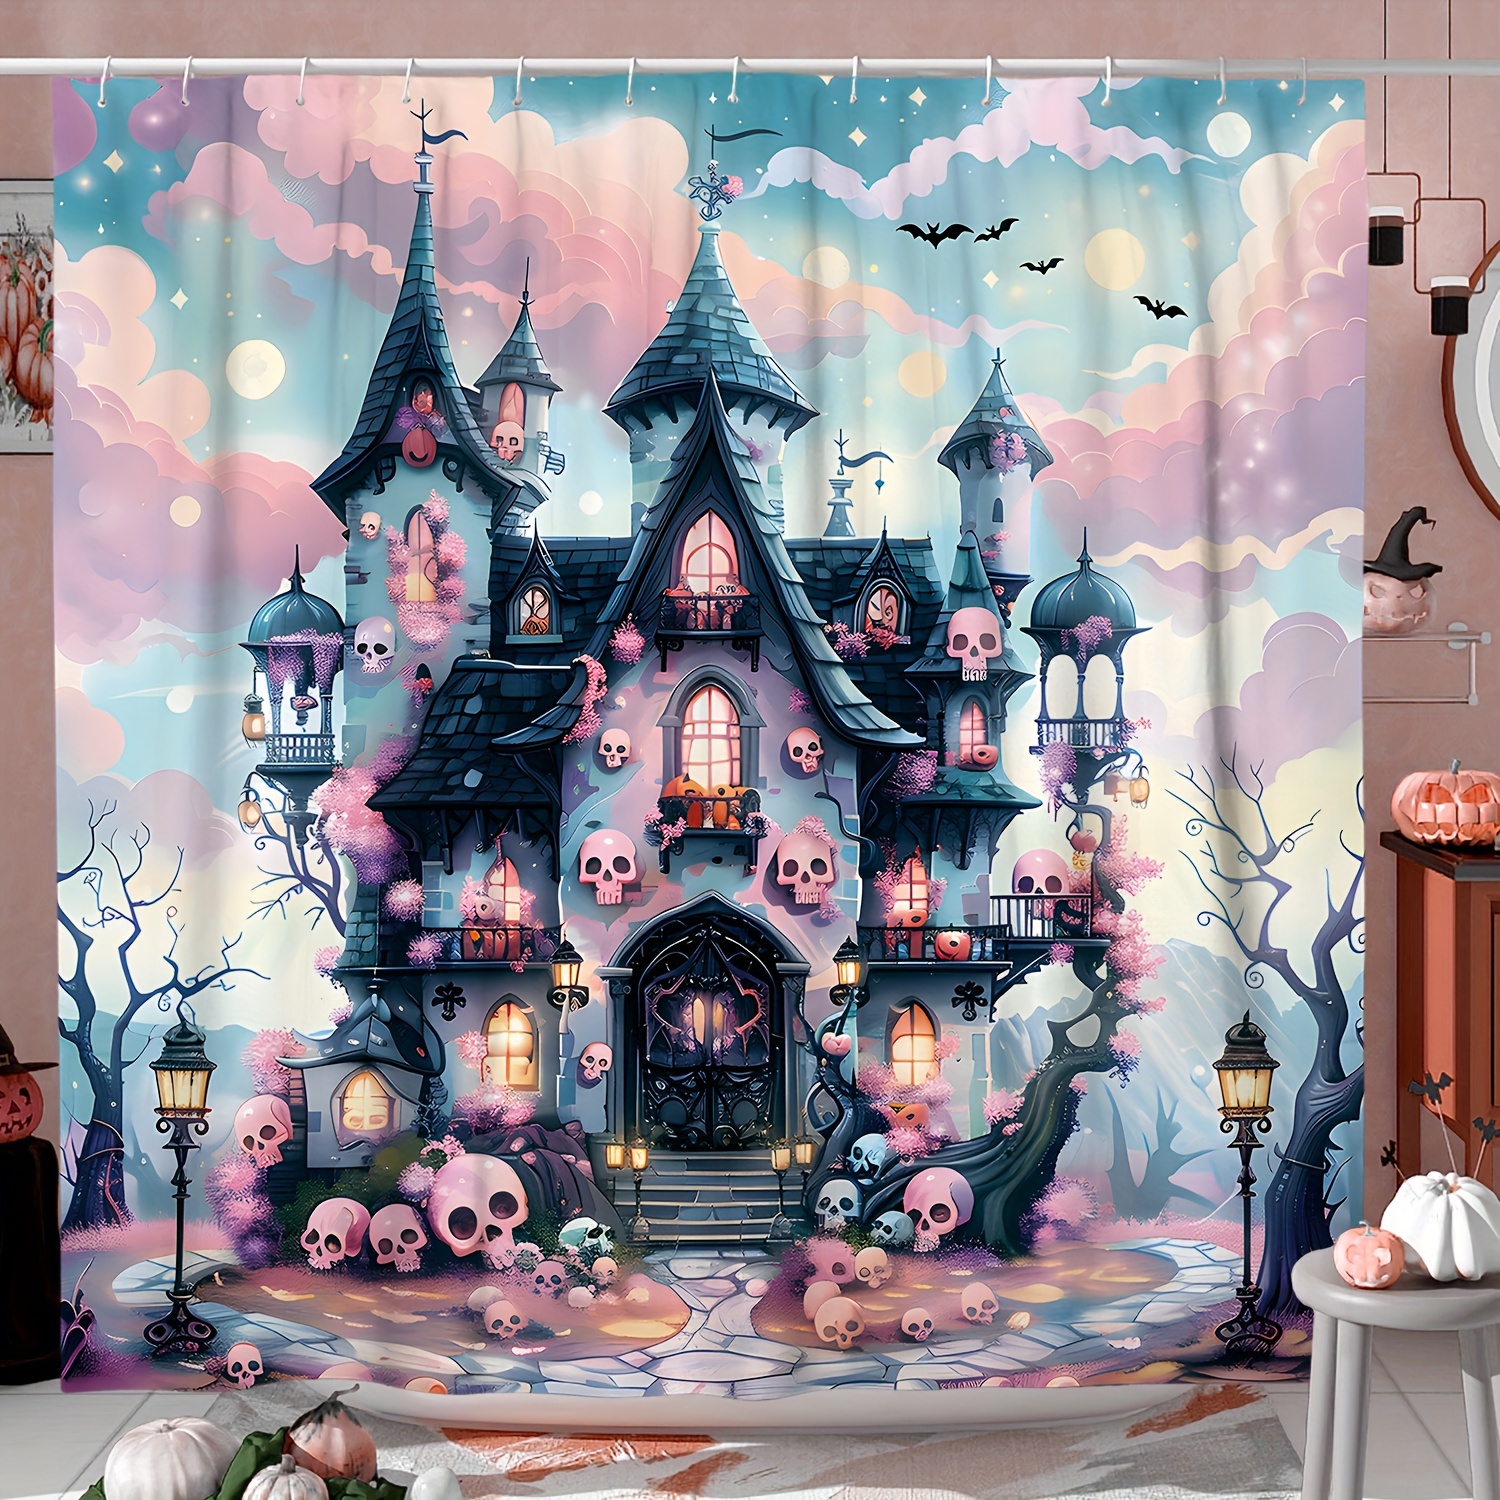 

Halloween Shower Curtain - Spooky Cute Dreamy Castle Bat Design In Lime Green Pink, Waterproof Polyester, Machine Washable With 12 Hooks, Perfect For Bathroom Or Bathtub Decorations, 71x71 Inch - 1pc